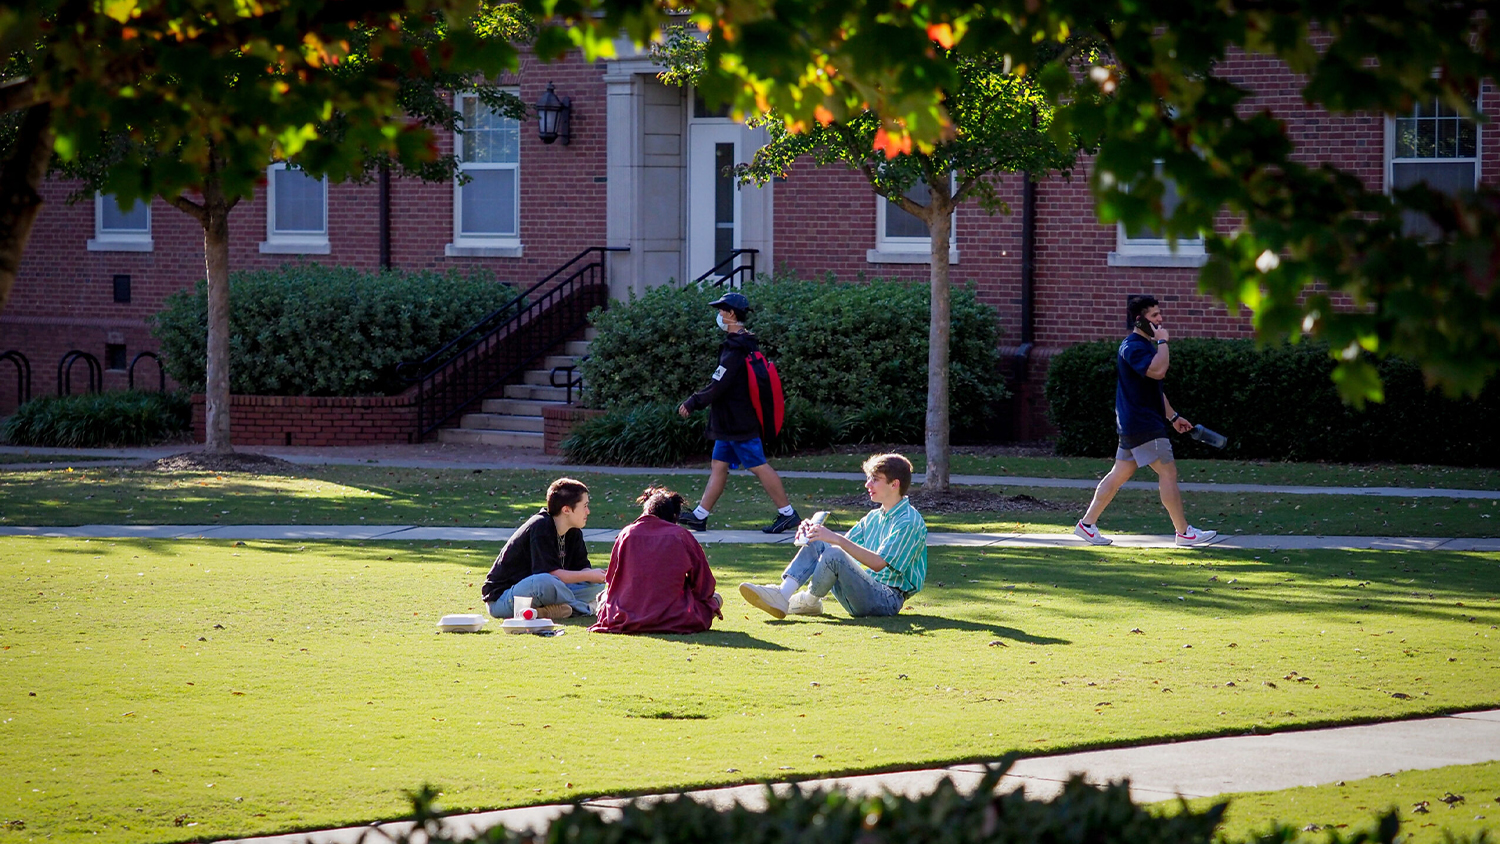 Students sit in a circle on the lawn in front of a residence hall while two other students walk by on the sidewalk behind them